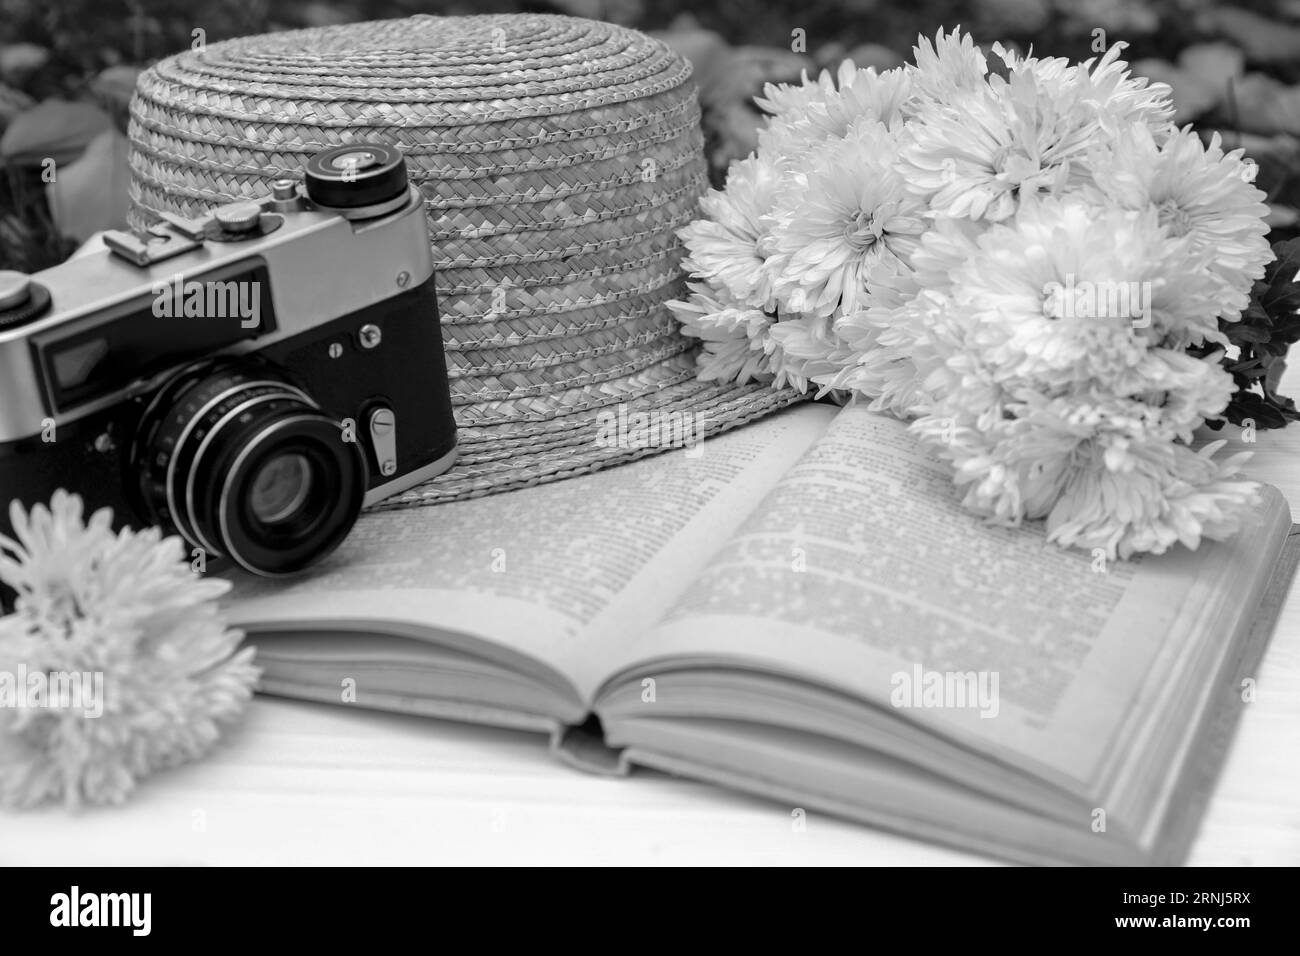 Composition with beautiful chrysanthemum flowers, vintage camera and book on table outdoors, closeup. Black and white effect Stock Photo